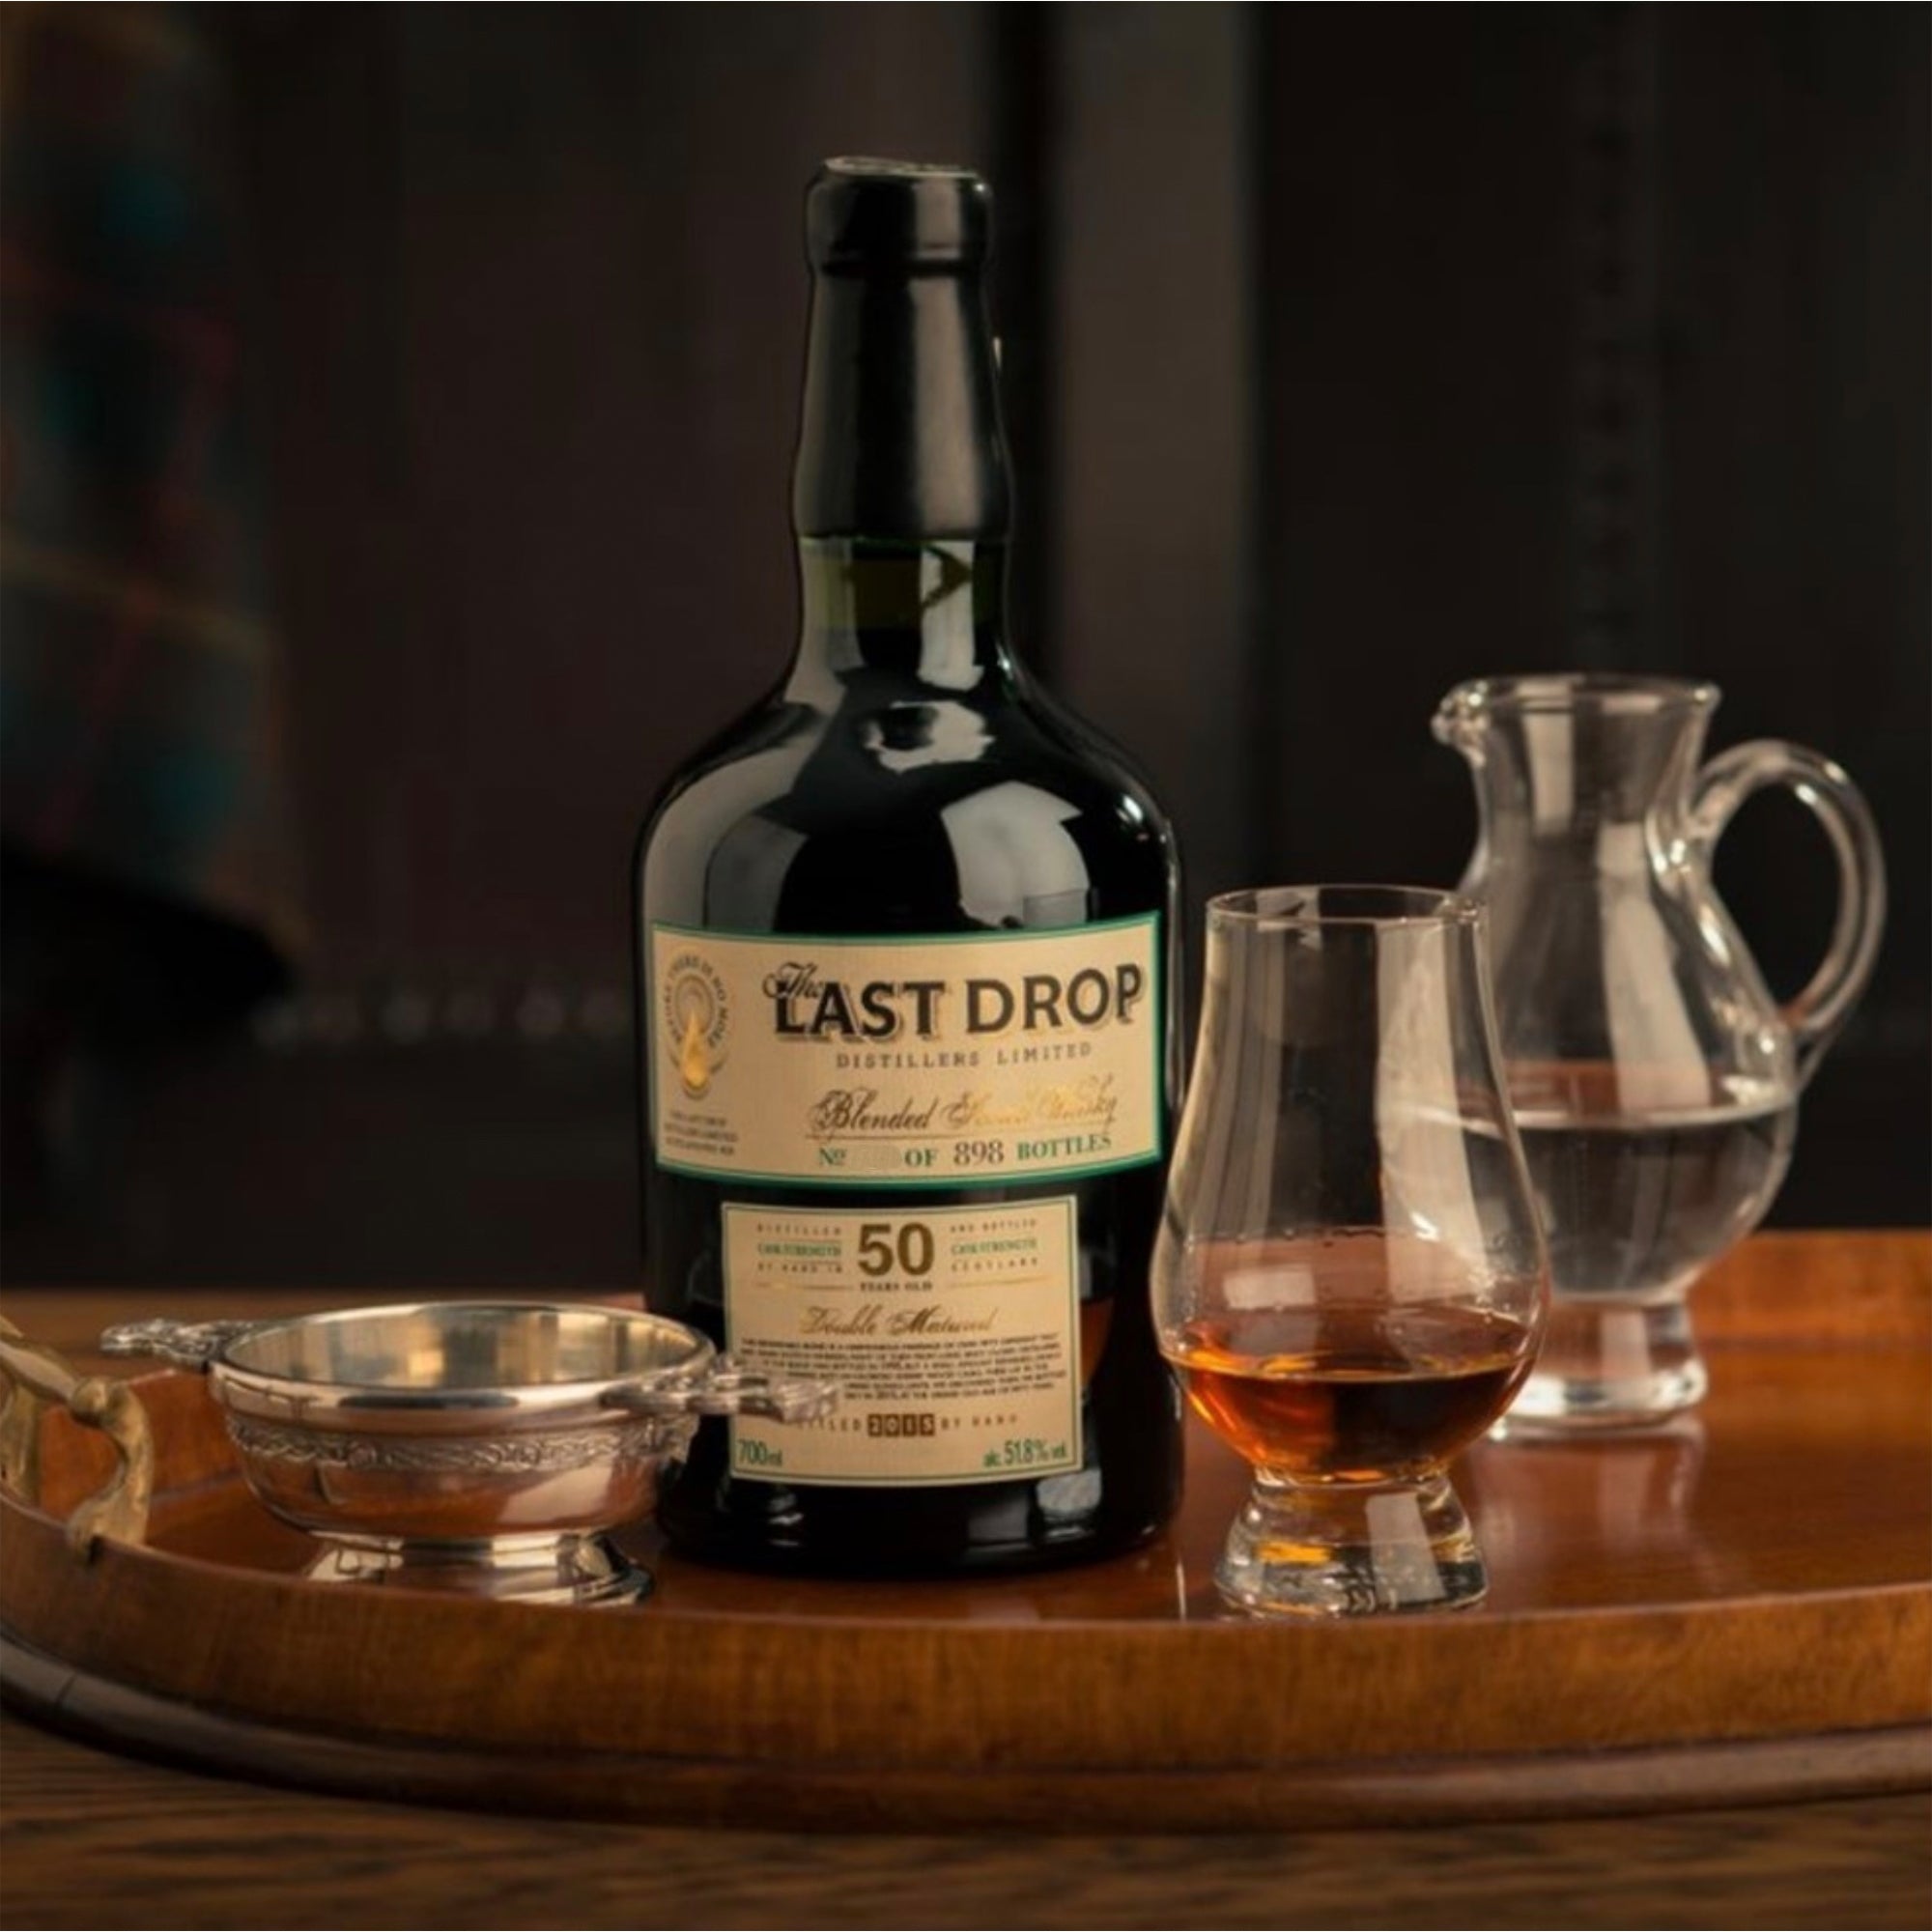 The Last Drop 50 Year Old “Double Matured” Blended Scotch Whisky